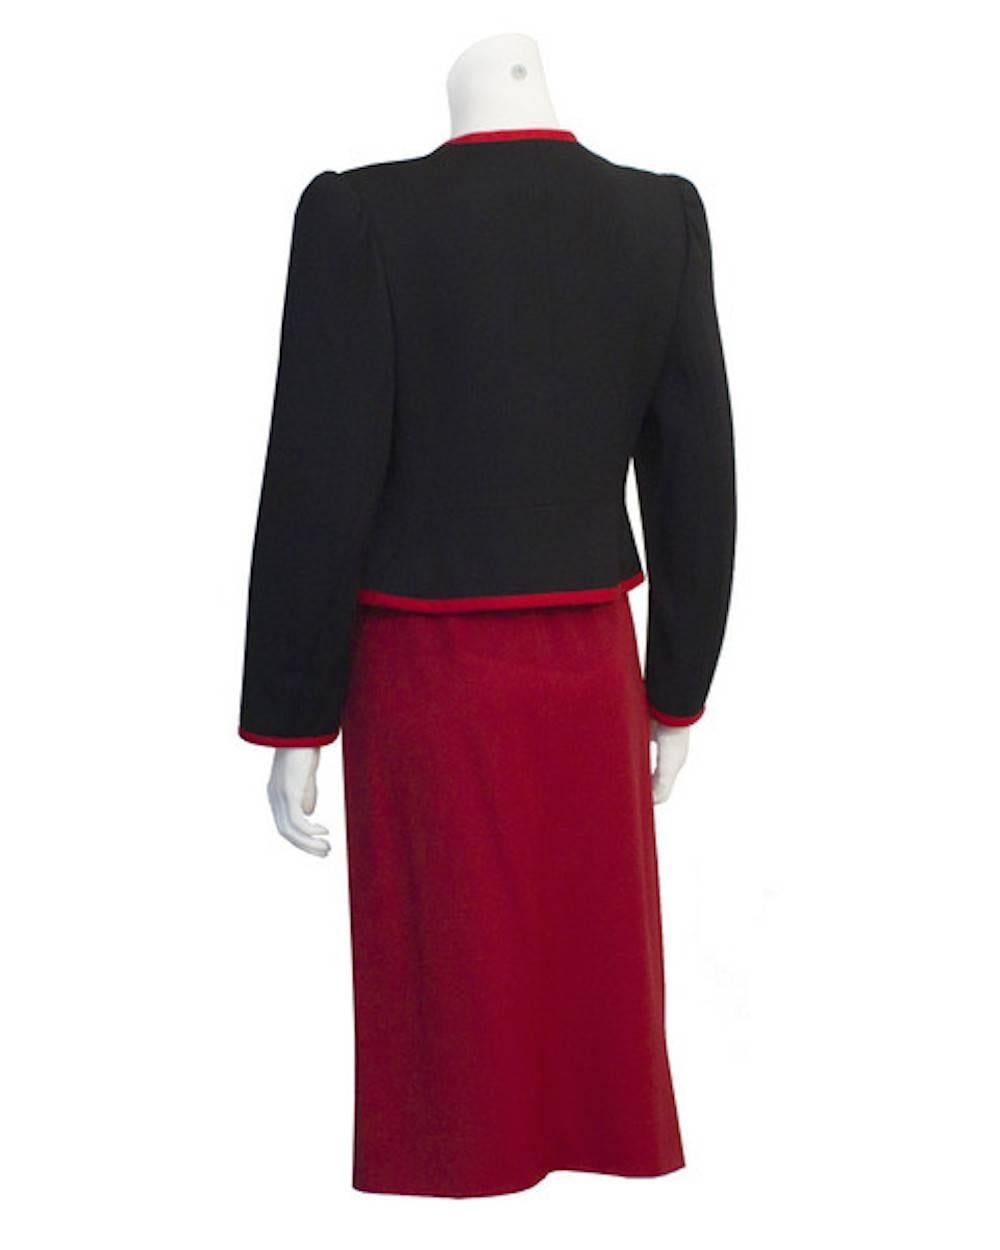 Very simple yet chic Yves Saint Laurent red and black couture label suit from the 1980s. The black wool gabardine jacket with red piping and buttons is the perfect piece to be worn with jeans or over another skirt but looks amazing when paired with